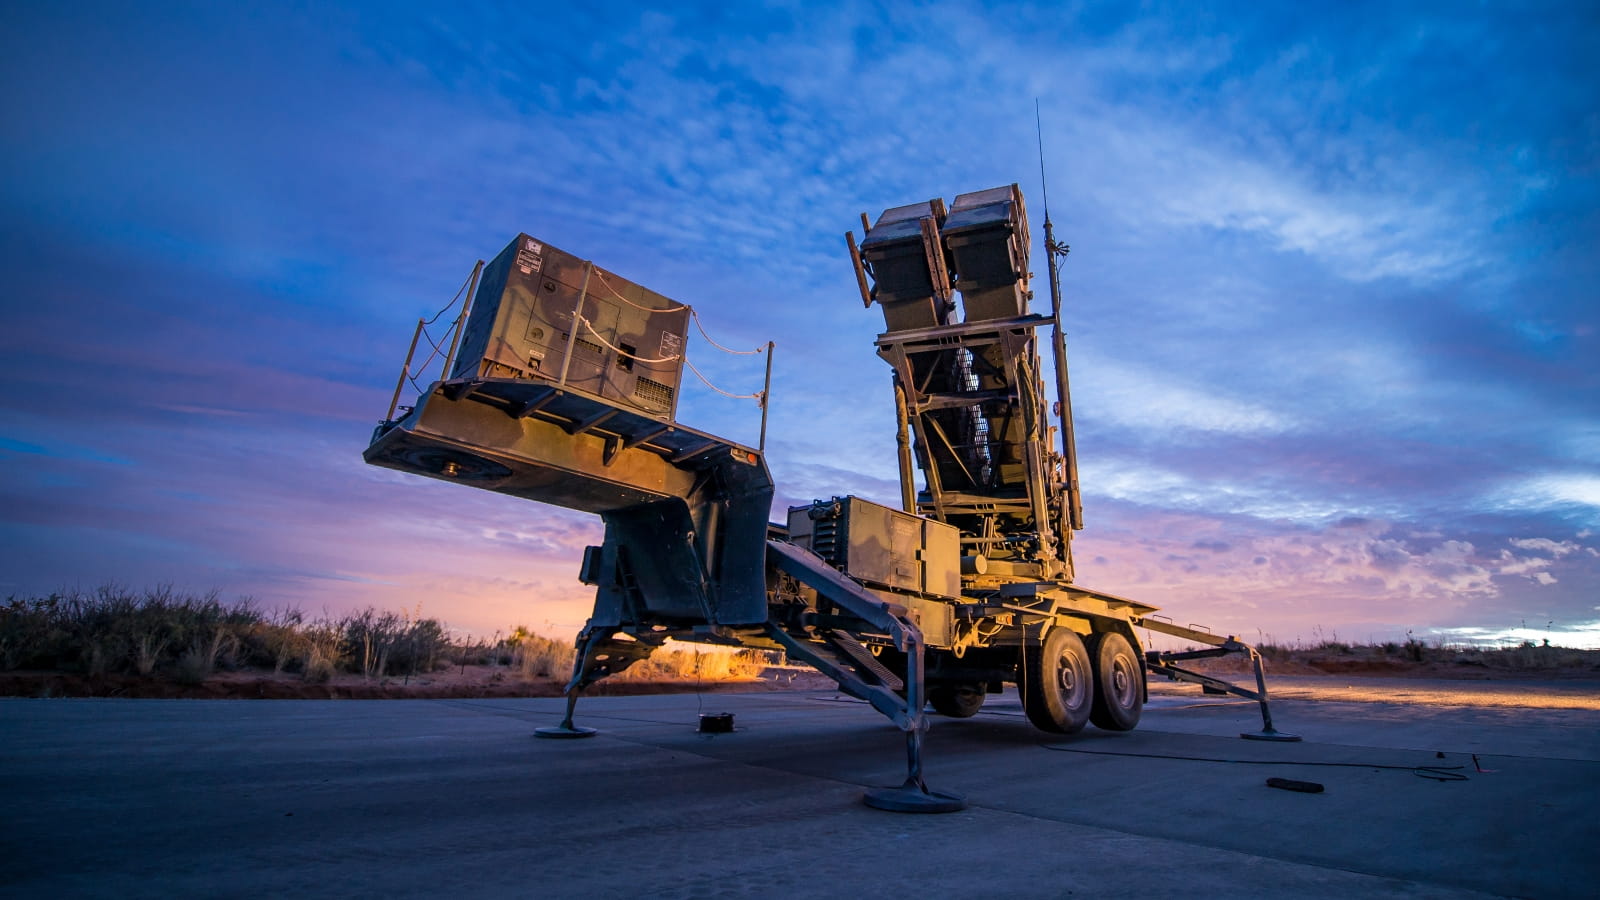 The Patriot missile launcher. 